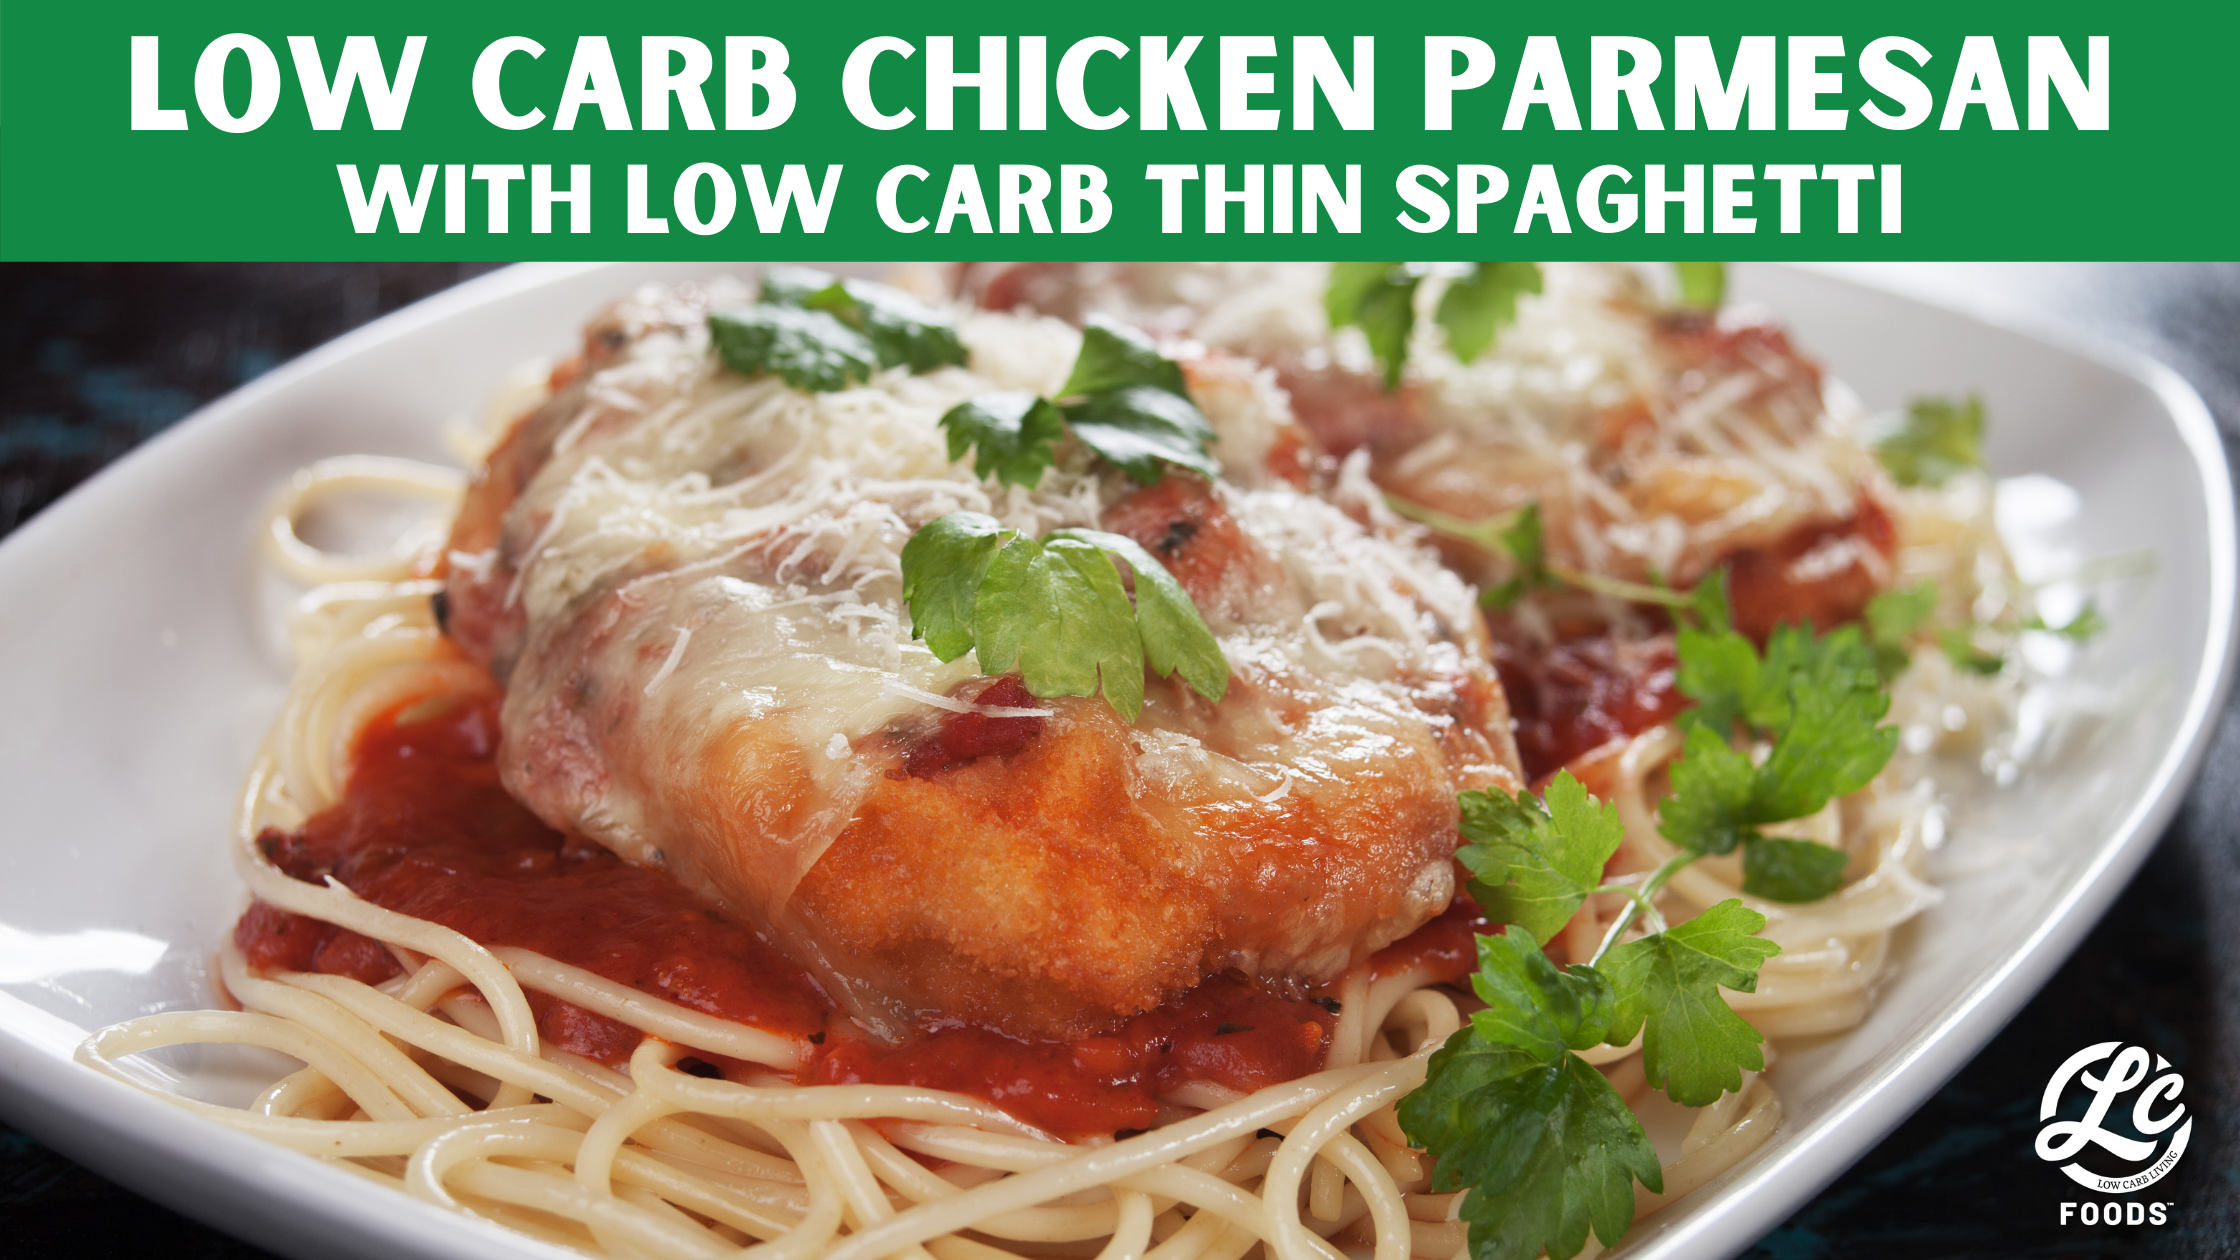 Thumbnail for Low Carb Chicken Parmesan with LC Thin Spaghetti